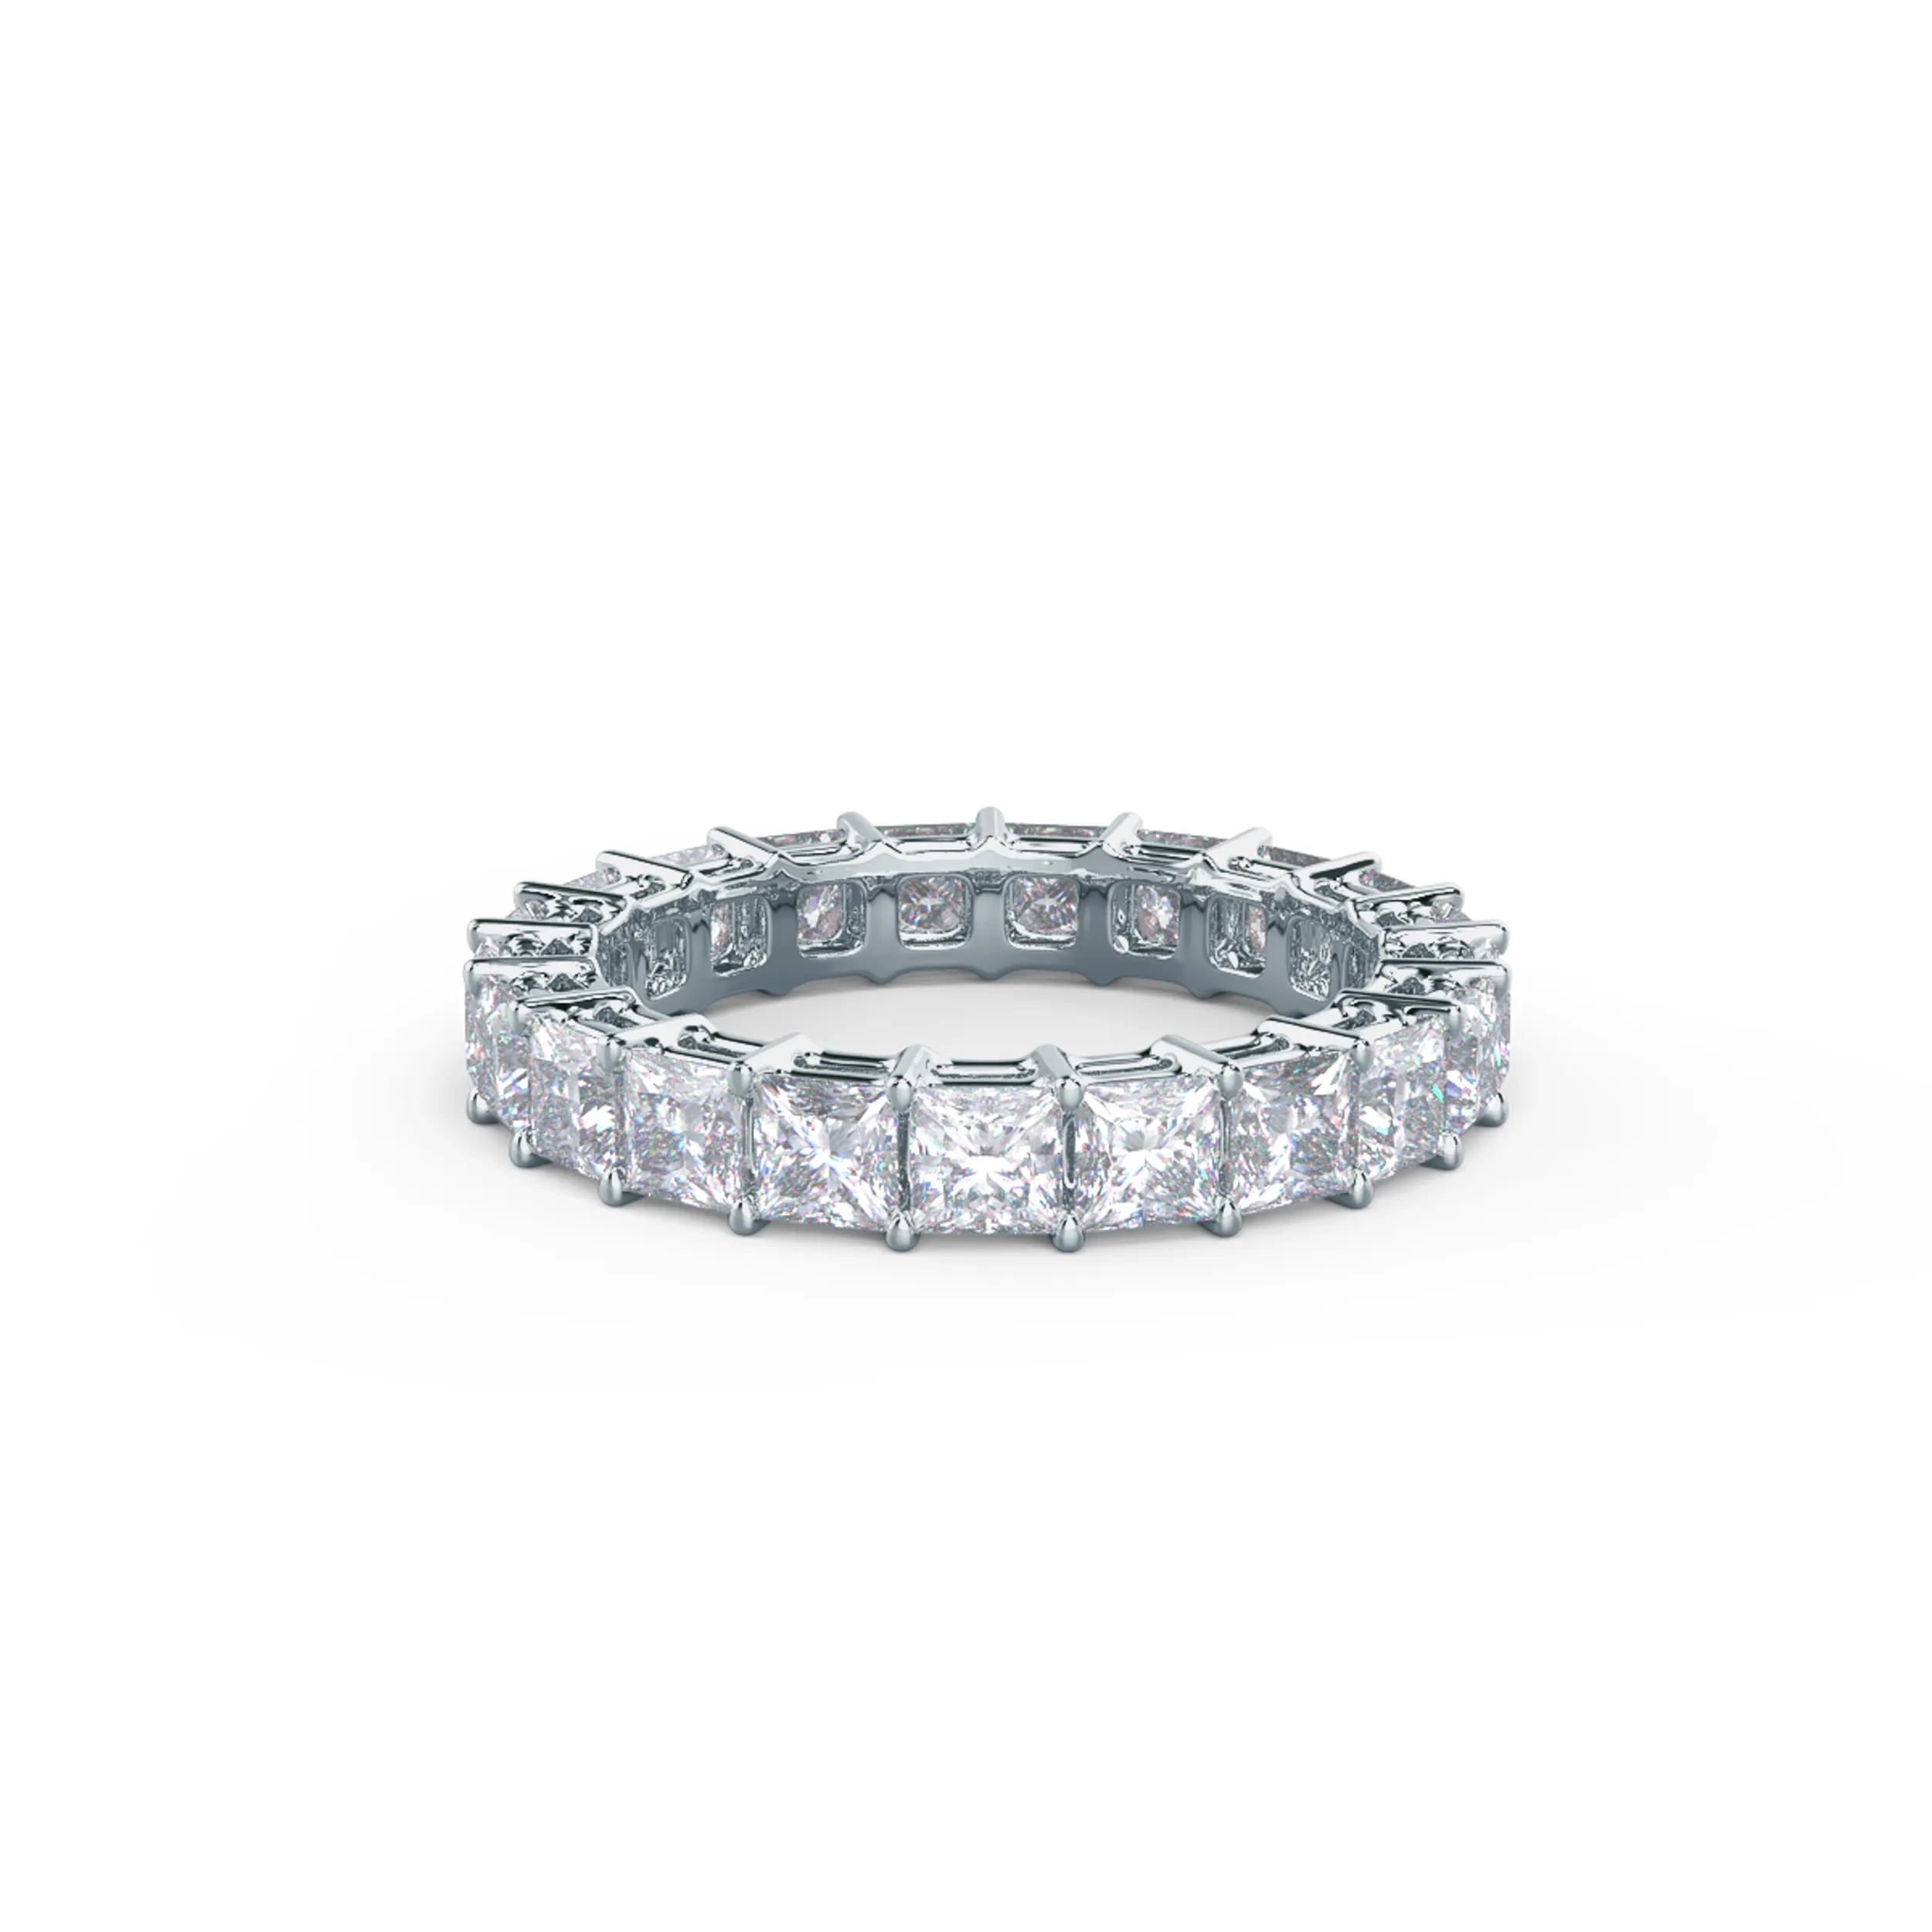 High Quality 4.0 Carat Diamonds Princess Eternity Band in 18k White Gold (Main View)